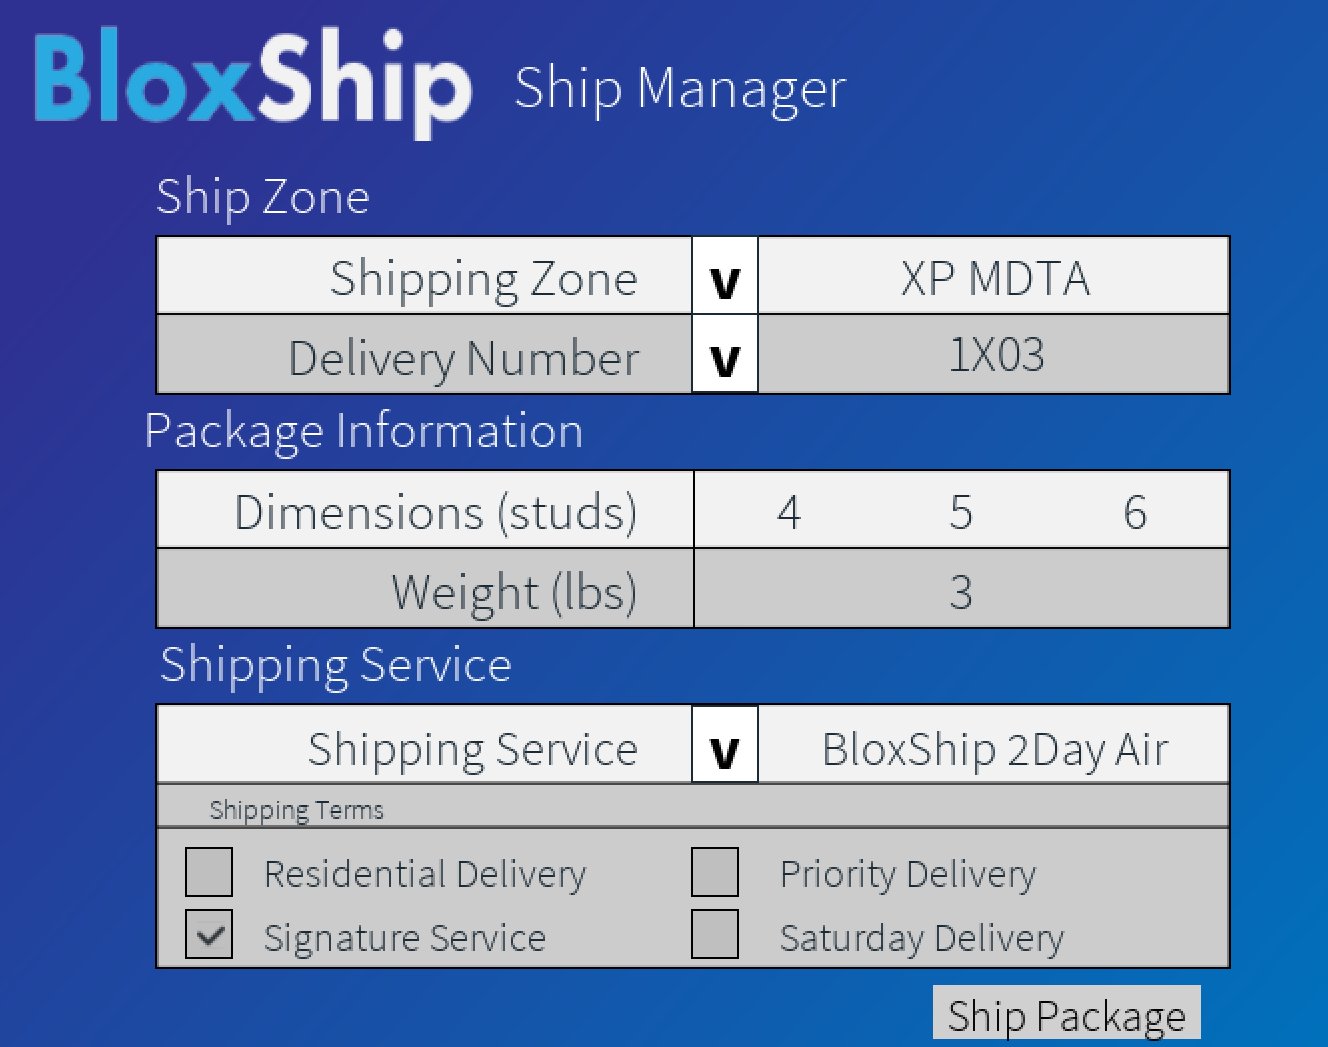 Jbn011 On Twitter Working On The Shipping Interface Right Now A